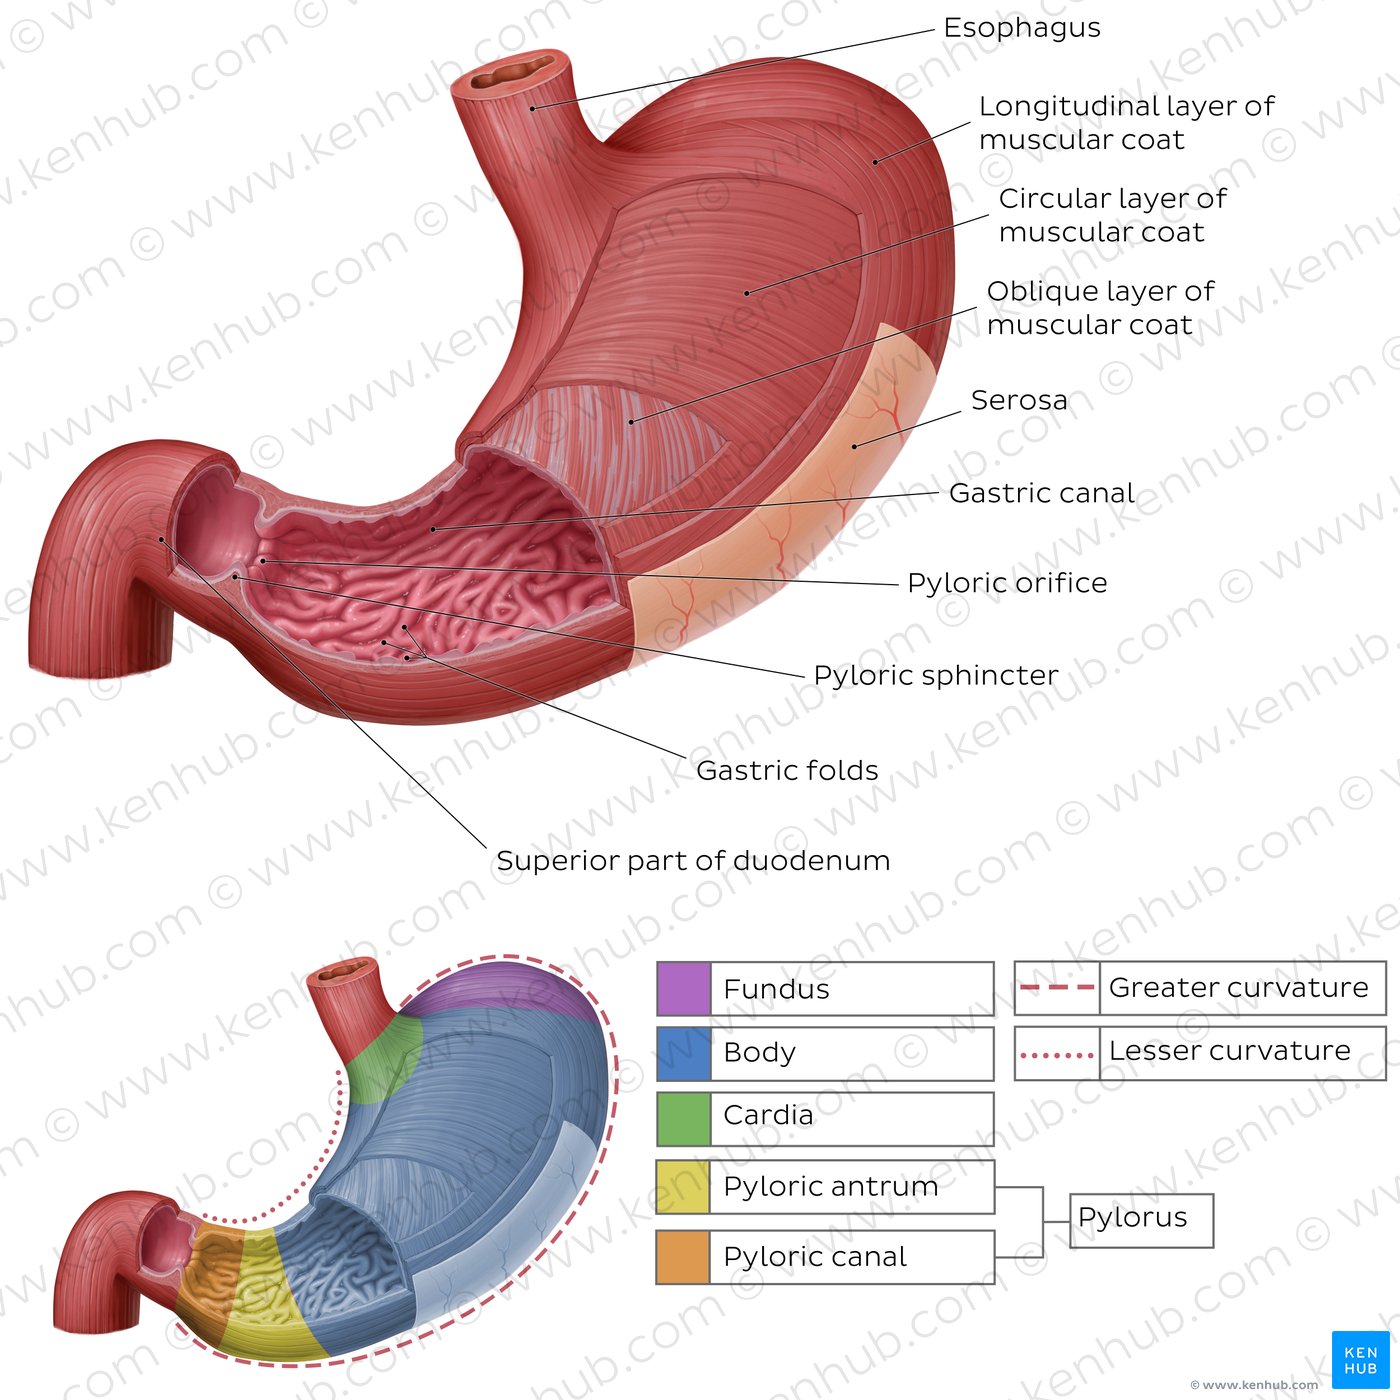 Anatomy of the stomach (anterior view)